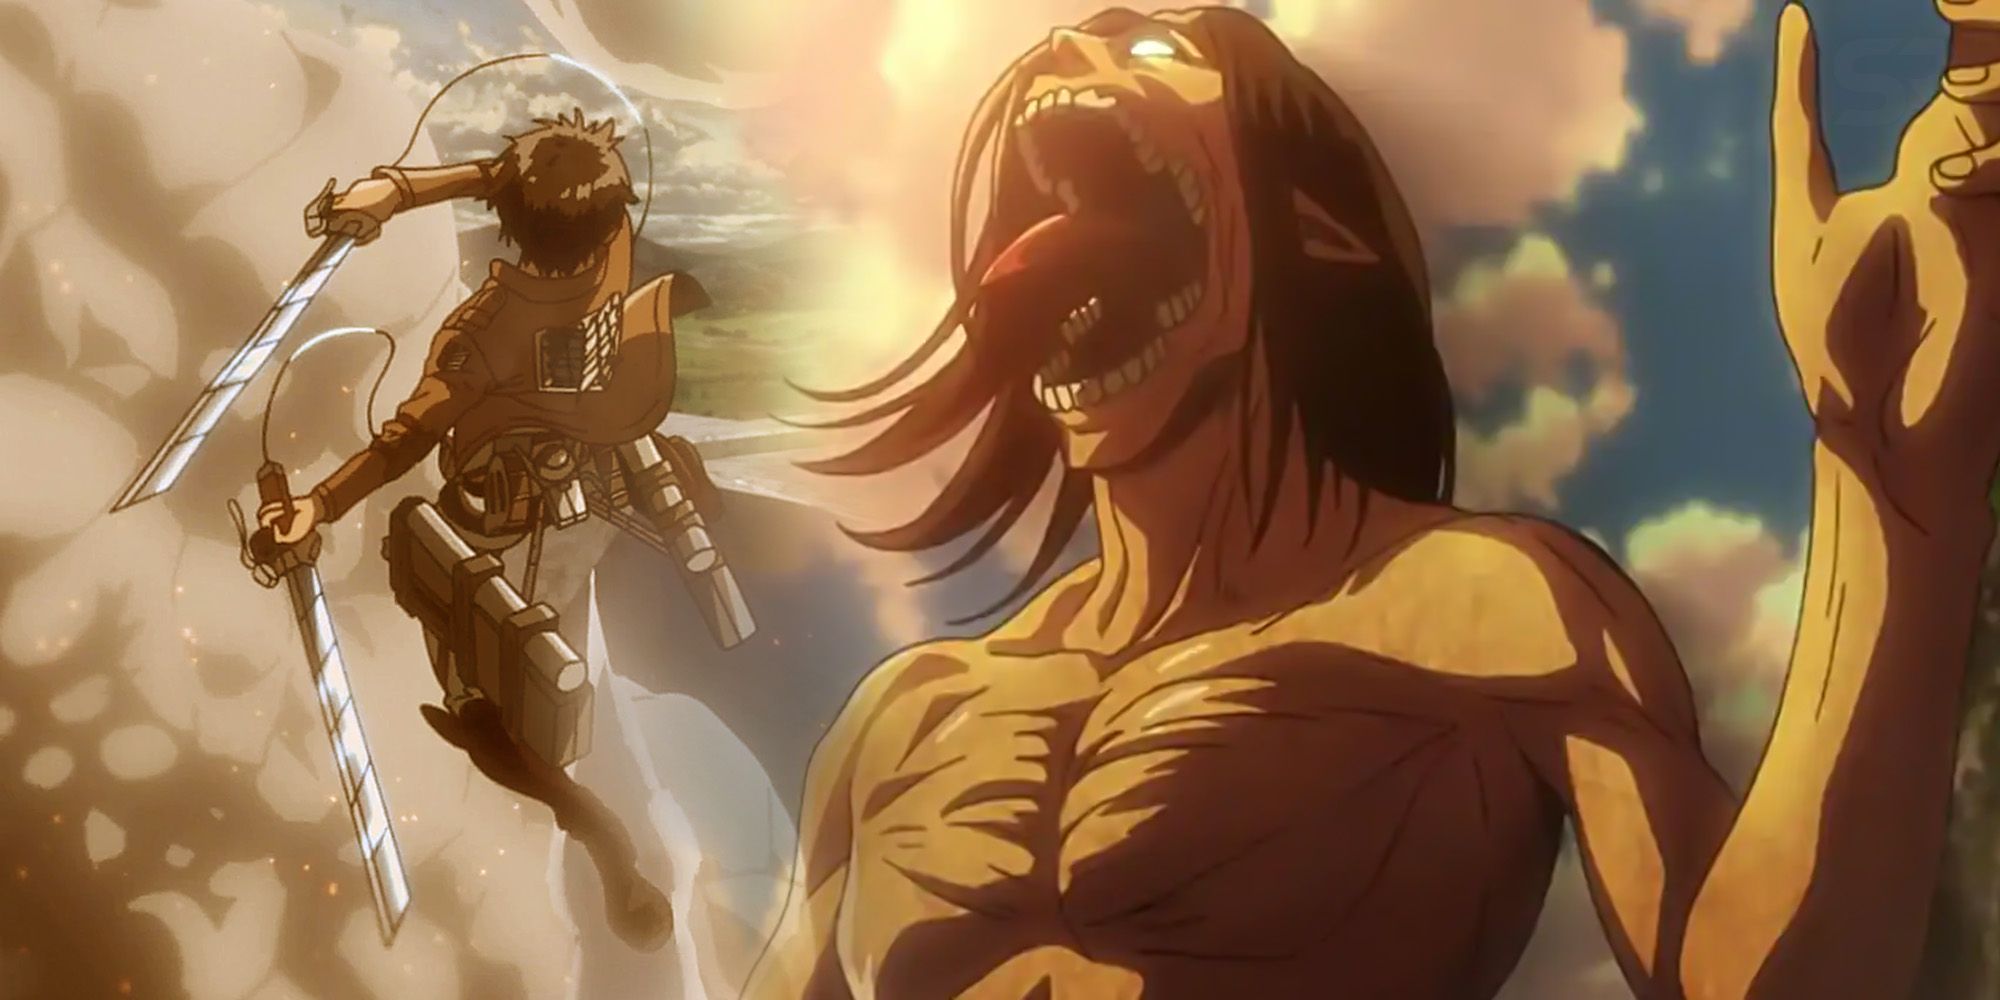 Attack on Titan: Why Titans Can Only Be Killed By Cutting Their Neck